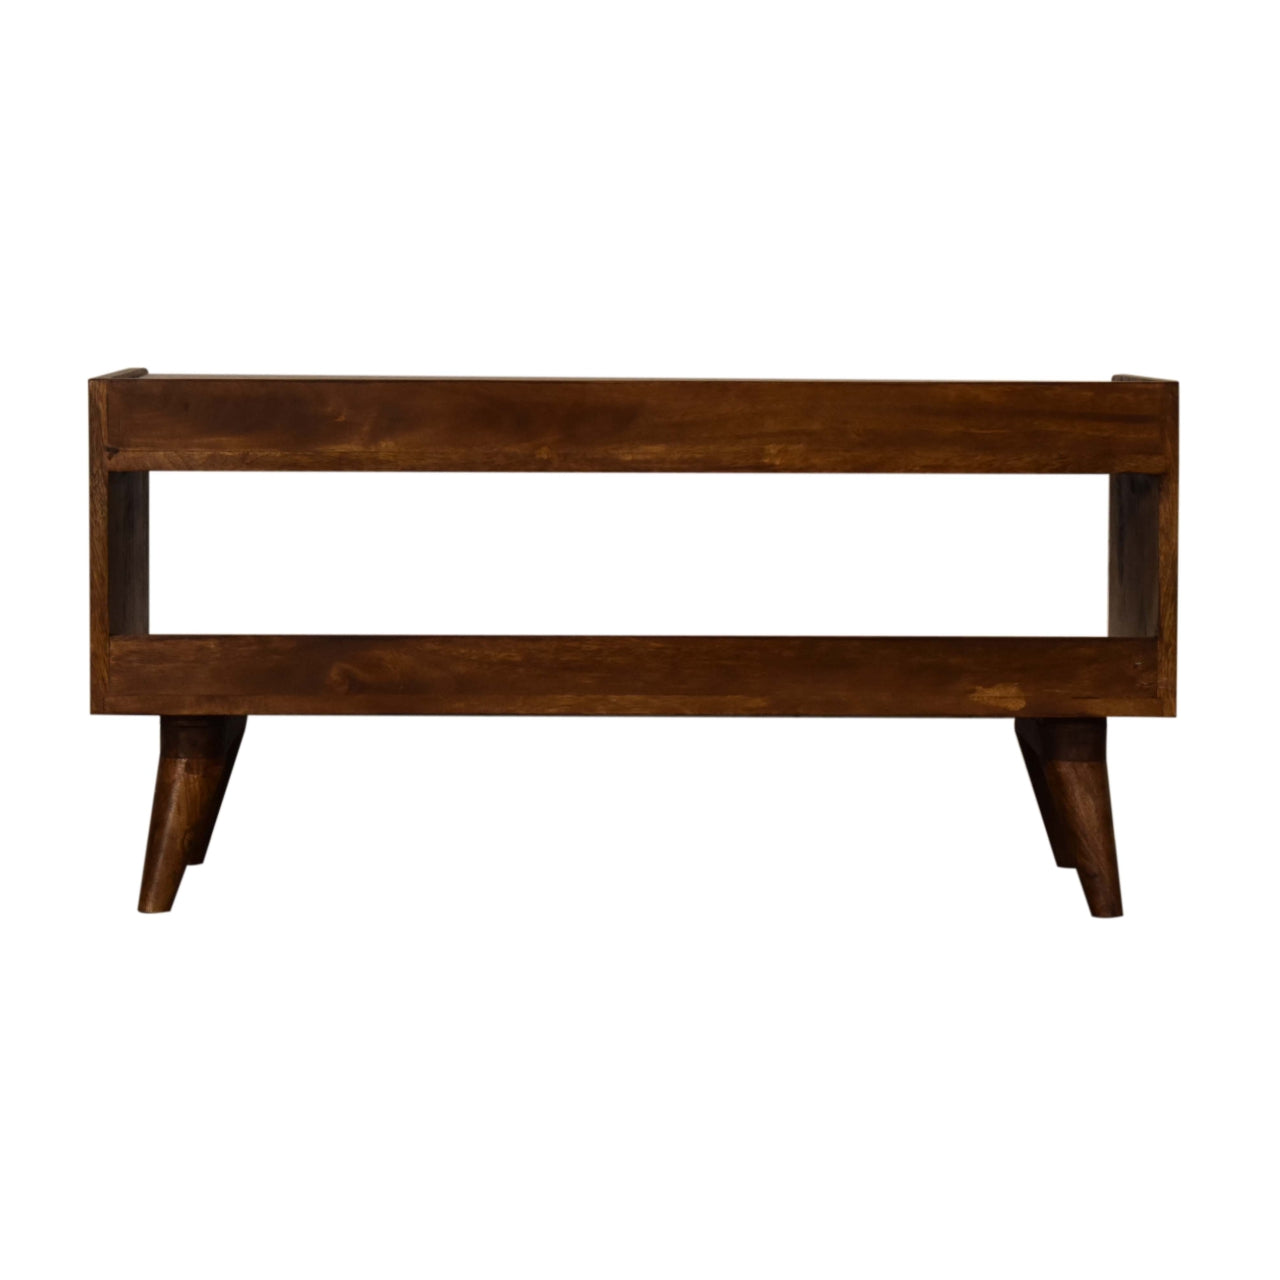 Solid Wood Nordic Chestnut Finish Storage Bench with Seat Pad